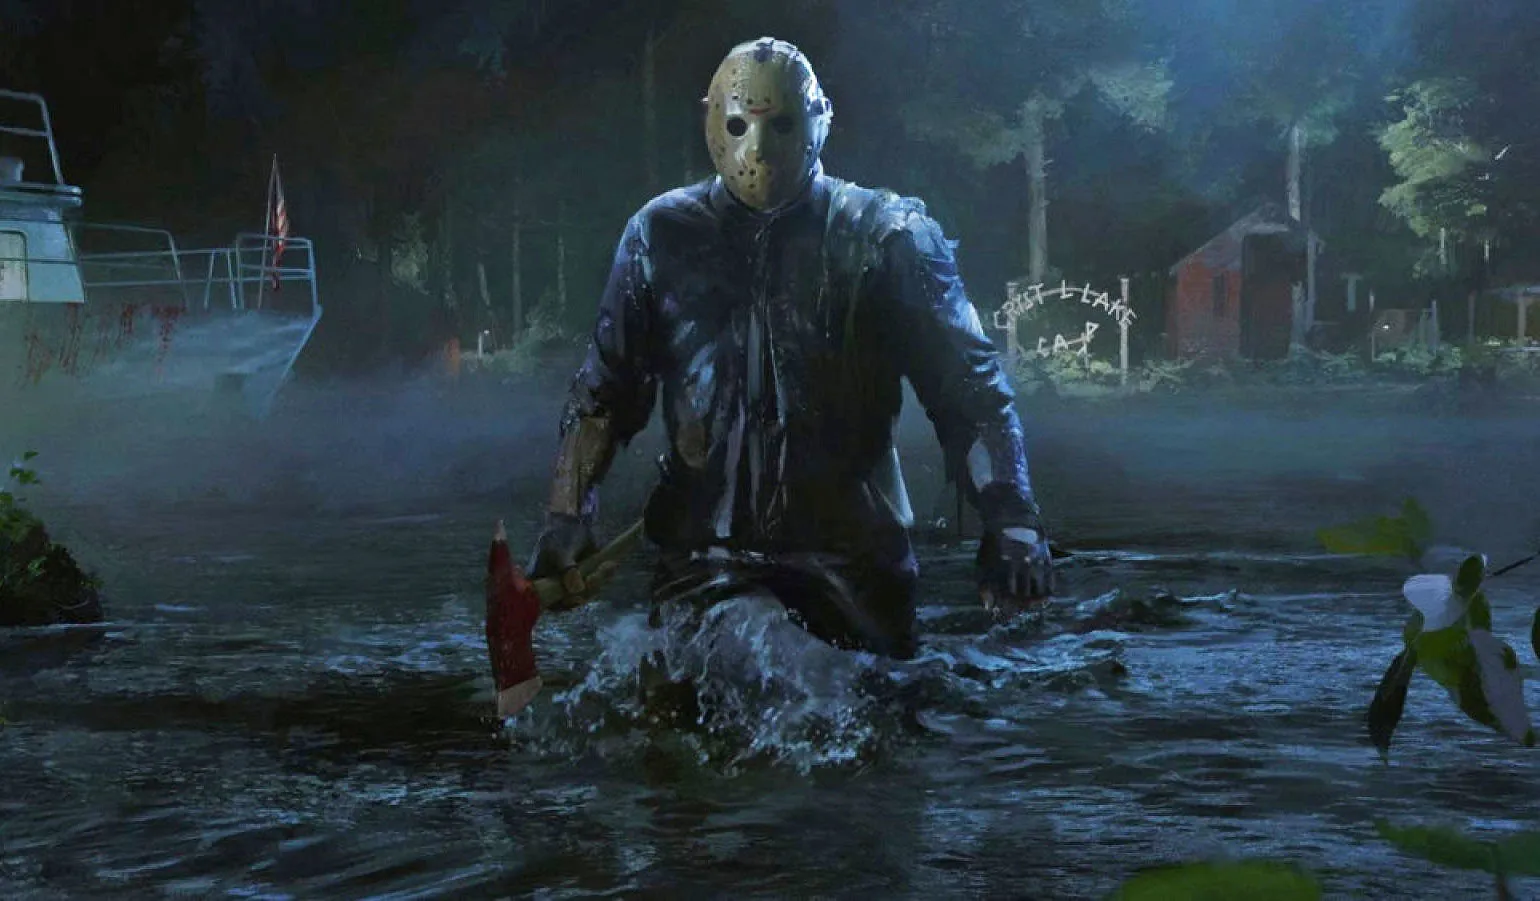 Nintendo Download: Friday the 13th – Destructoid